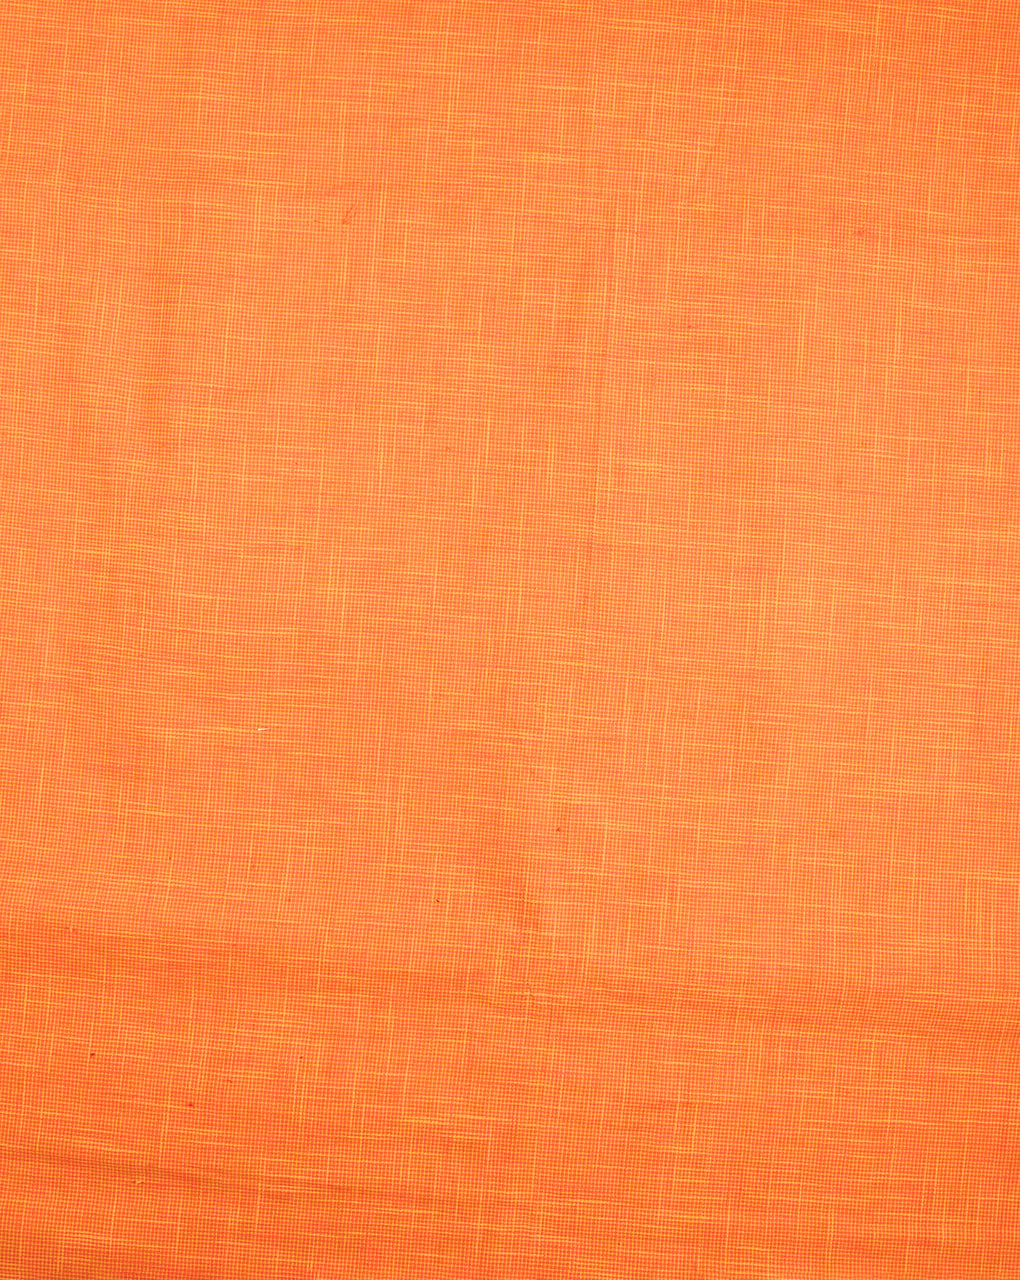 Woven Loom Textured 20'S Cotton Fabric - Fabriclore.com